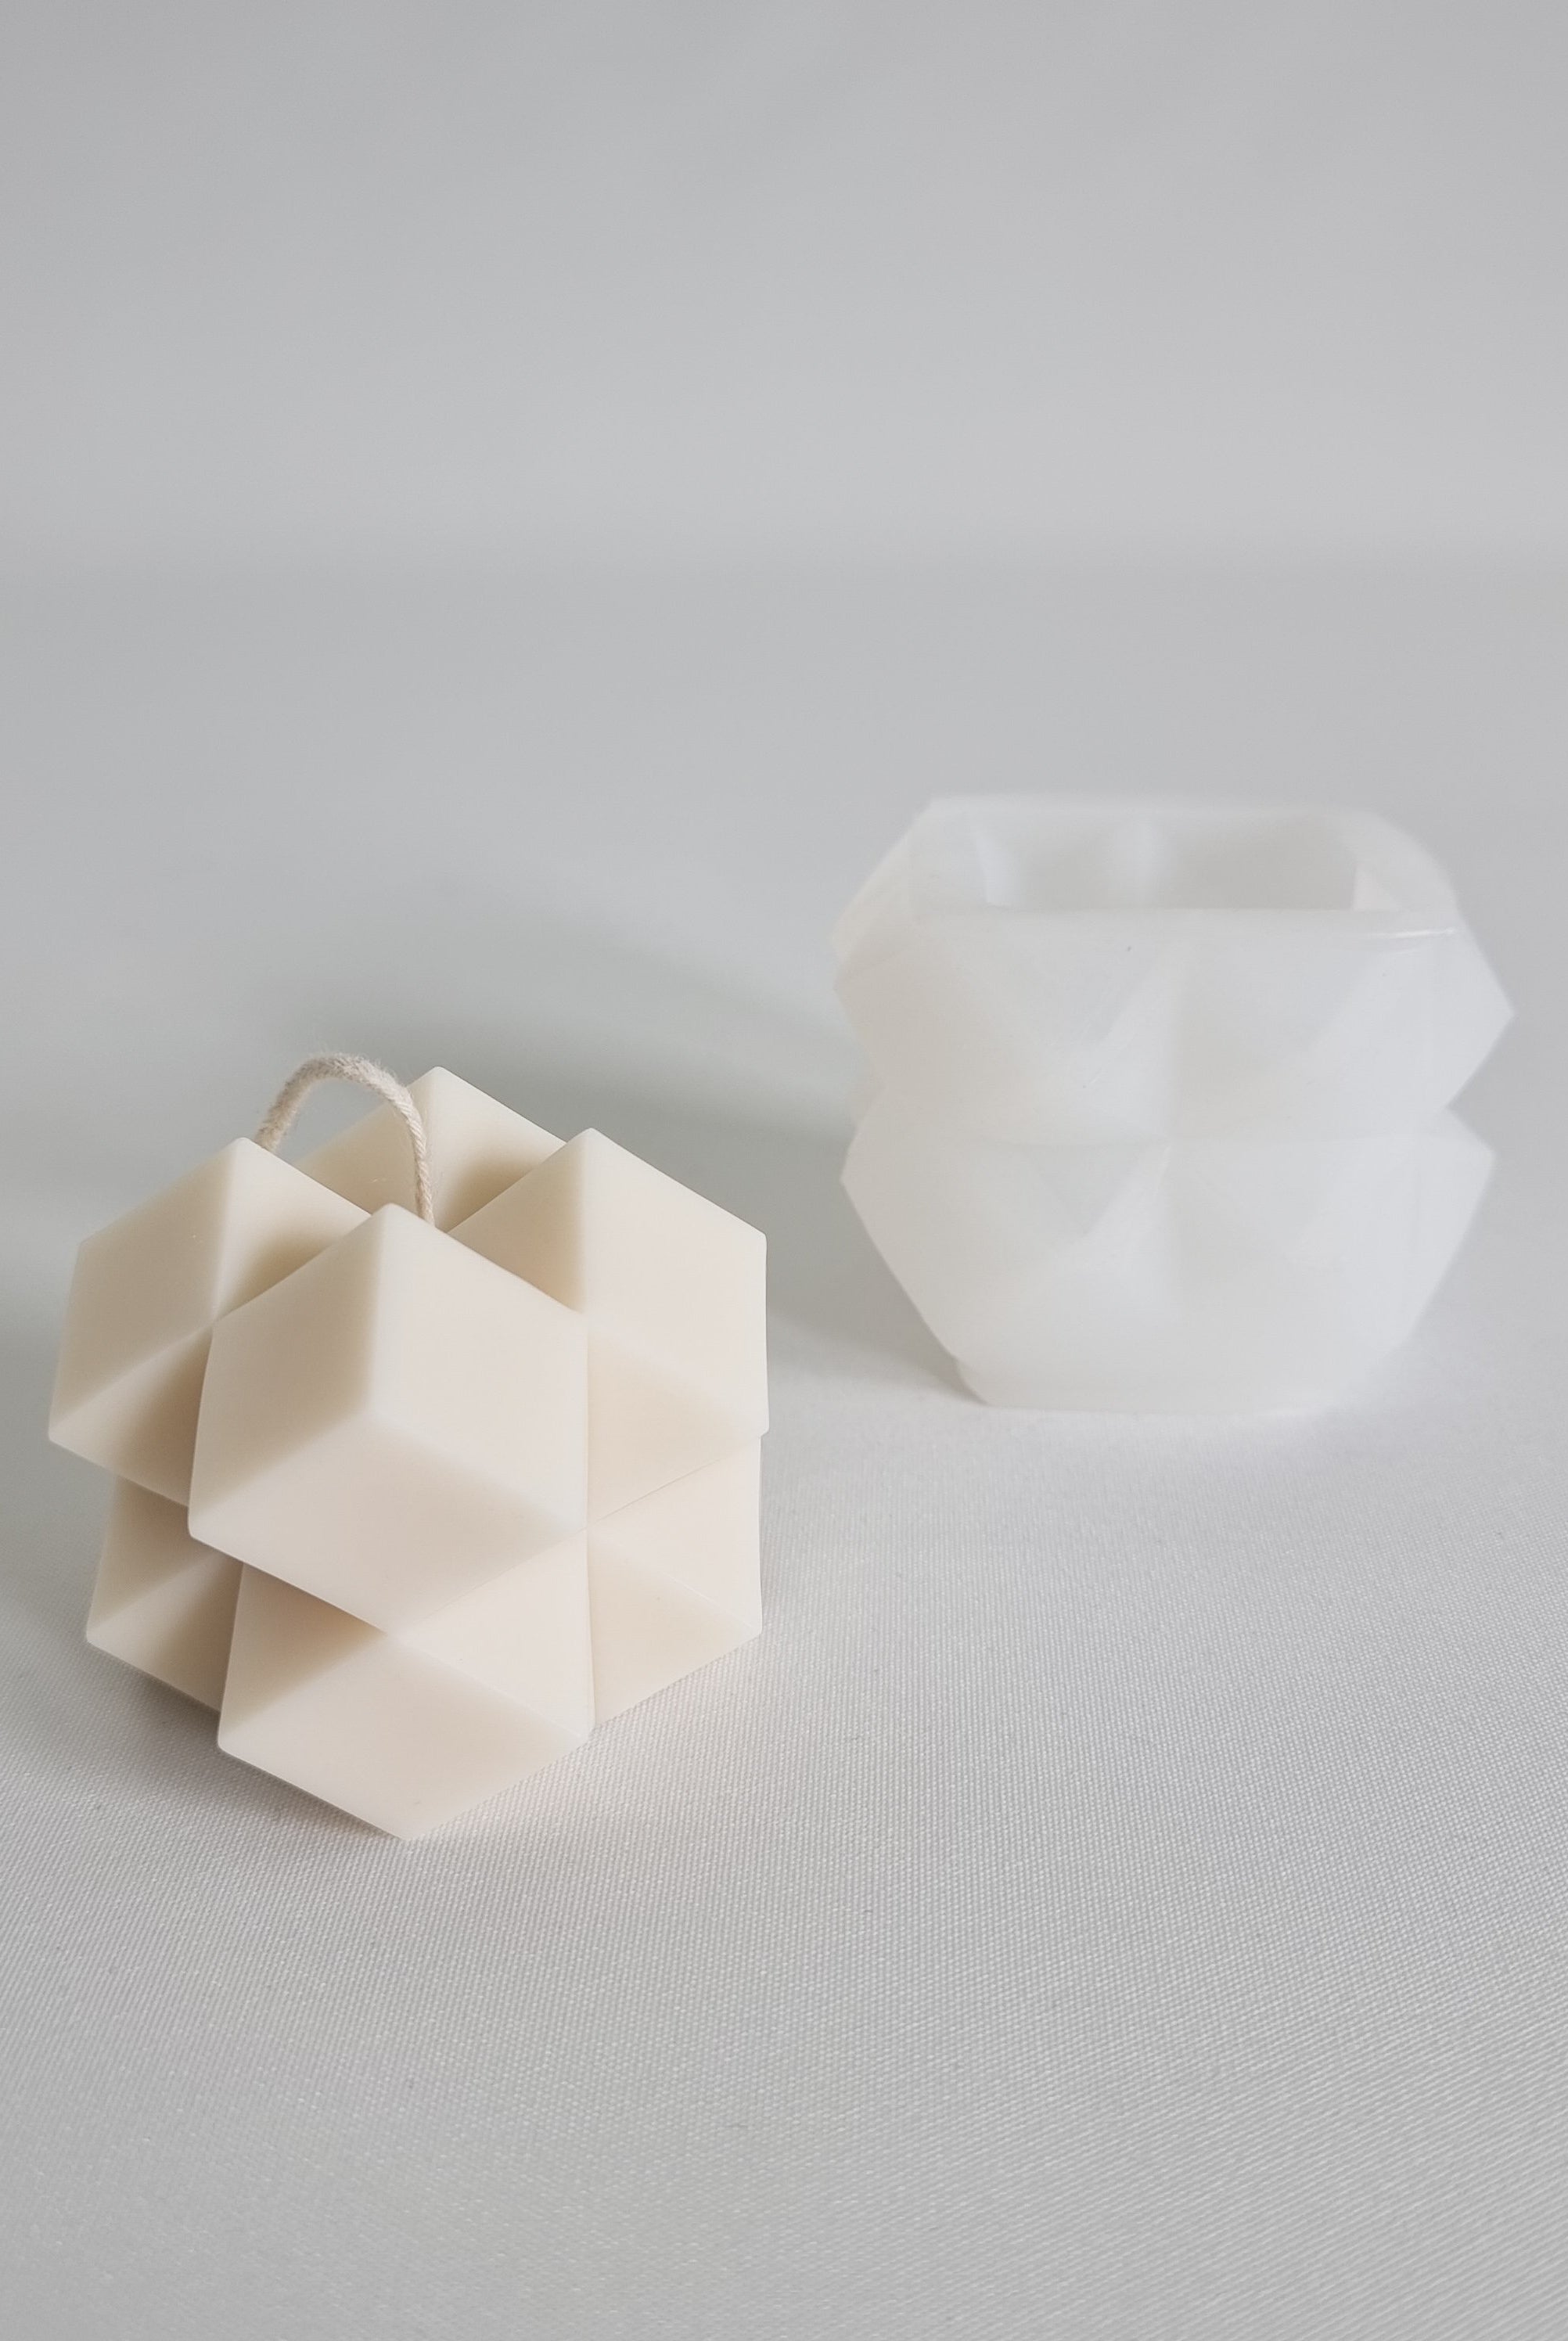 Sharp Cube Candle Moulds 4 - Silicone Mould, Mold for DIY Candles. Created using candle making kit with cotton candle wicks and candle colour chips. Using soy wax for pillar candles. Sold by Myka Candles Moulds Australia